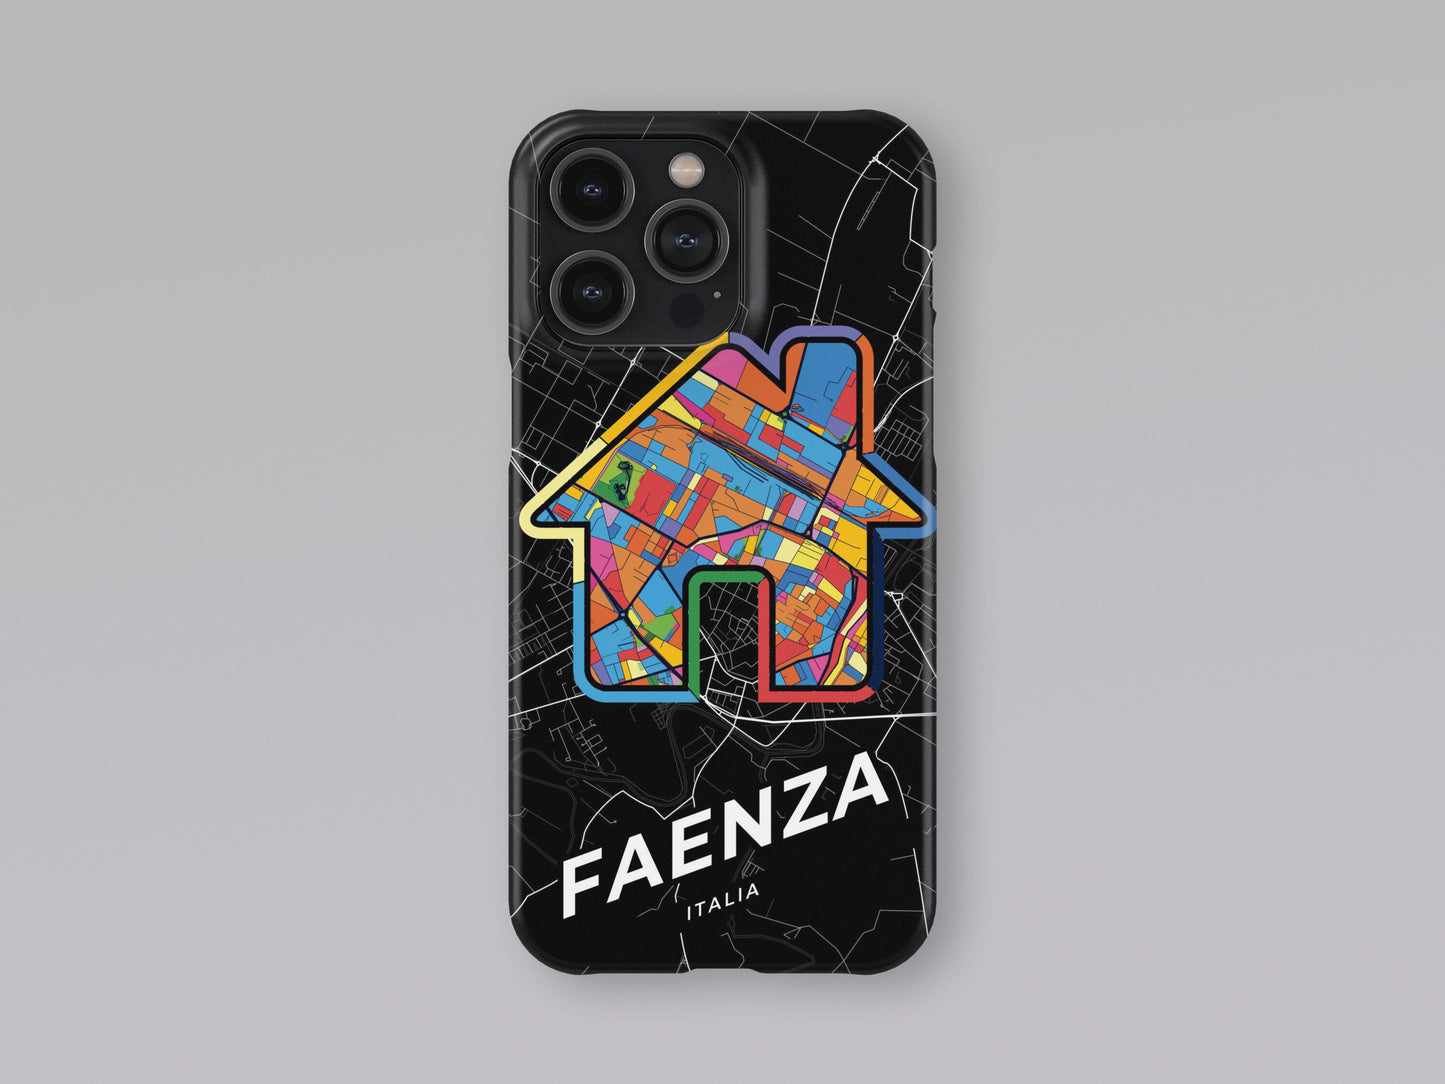 Faenza Italy slim phone case with colorful icon. Birthday, wedding or housewarming gift. Couple match cases. 3